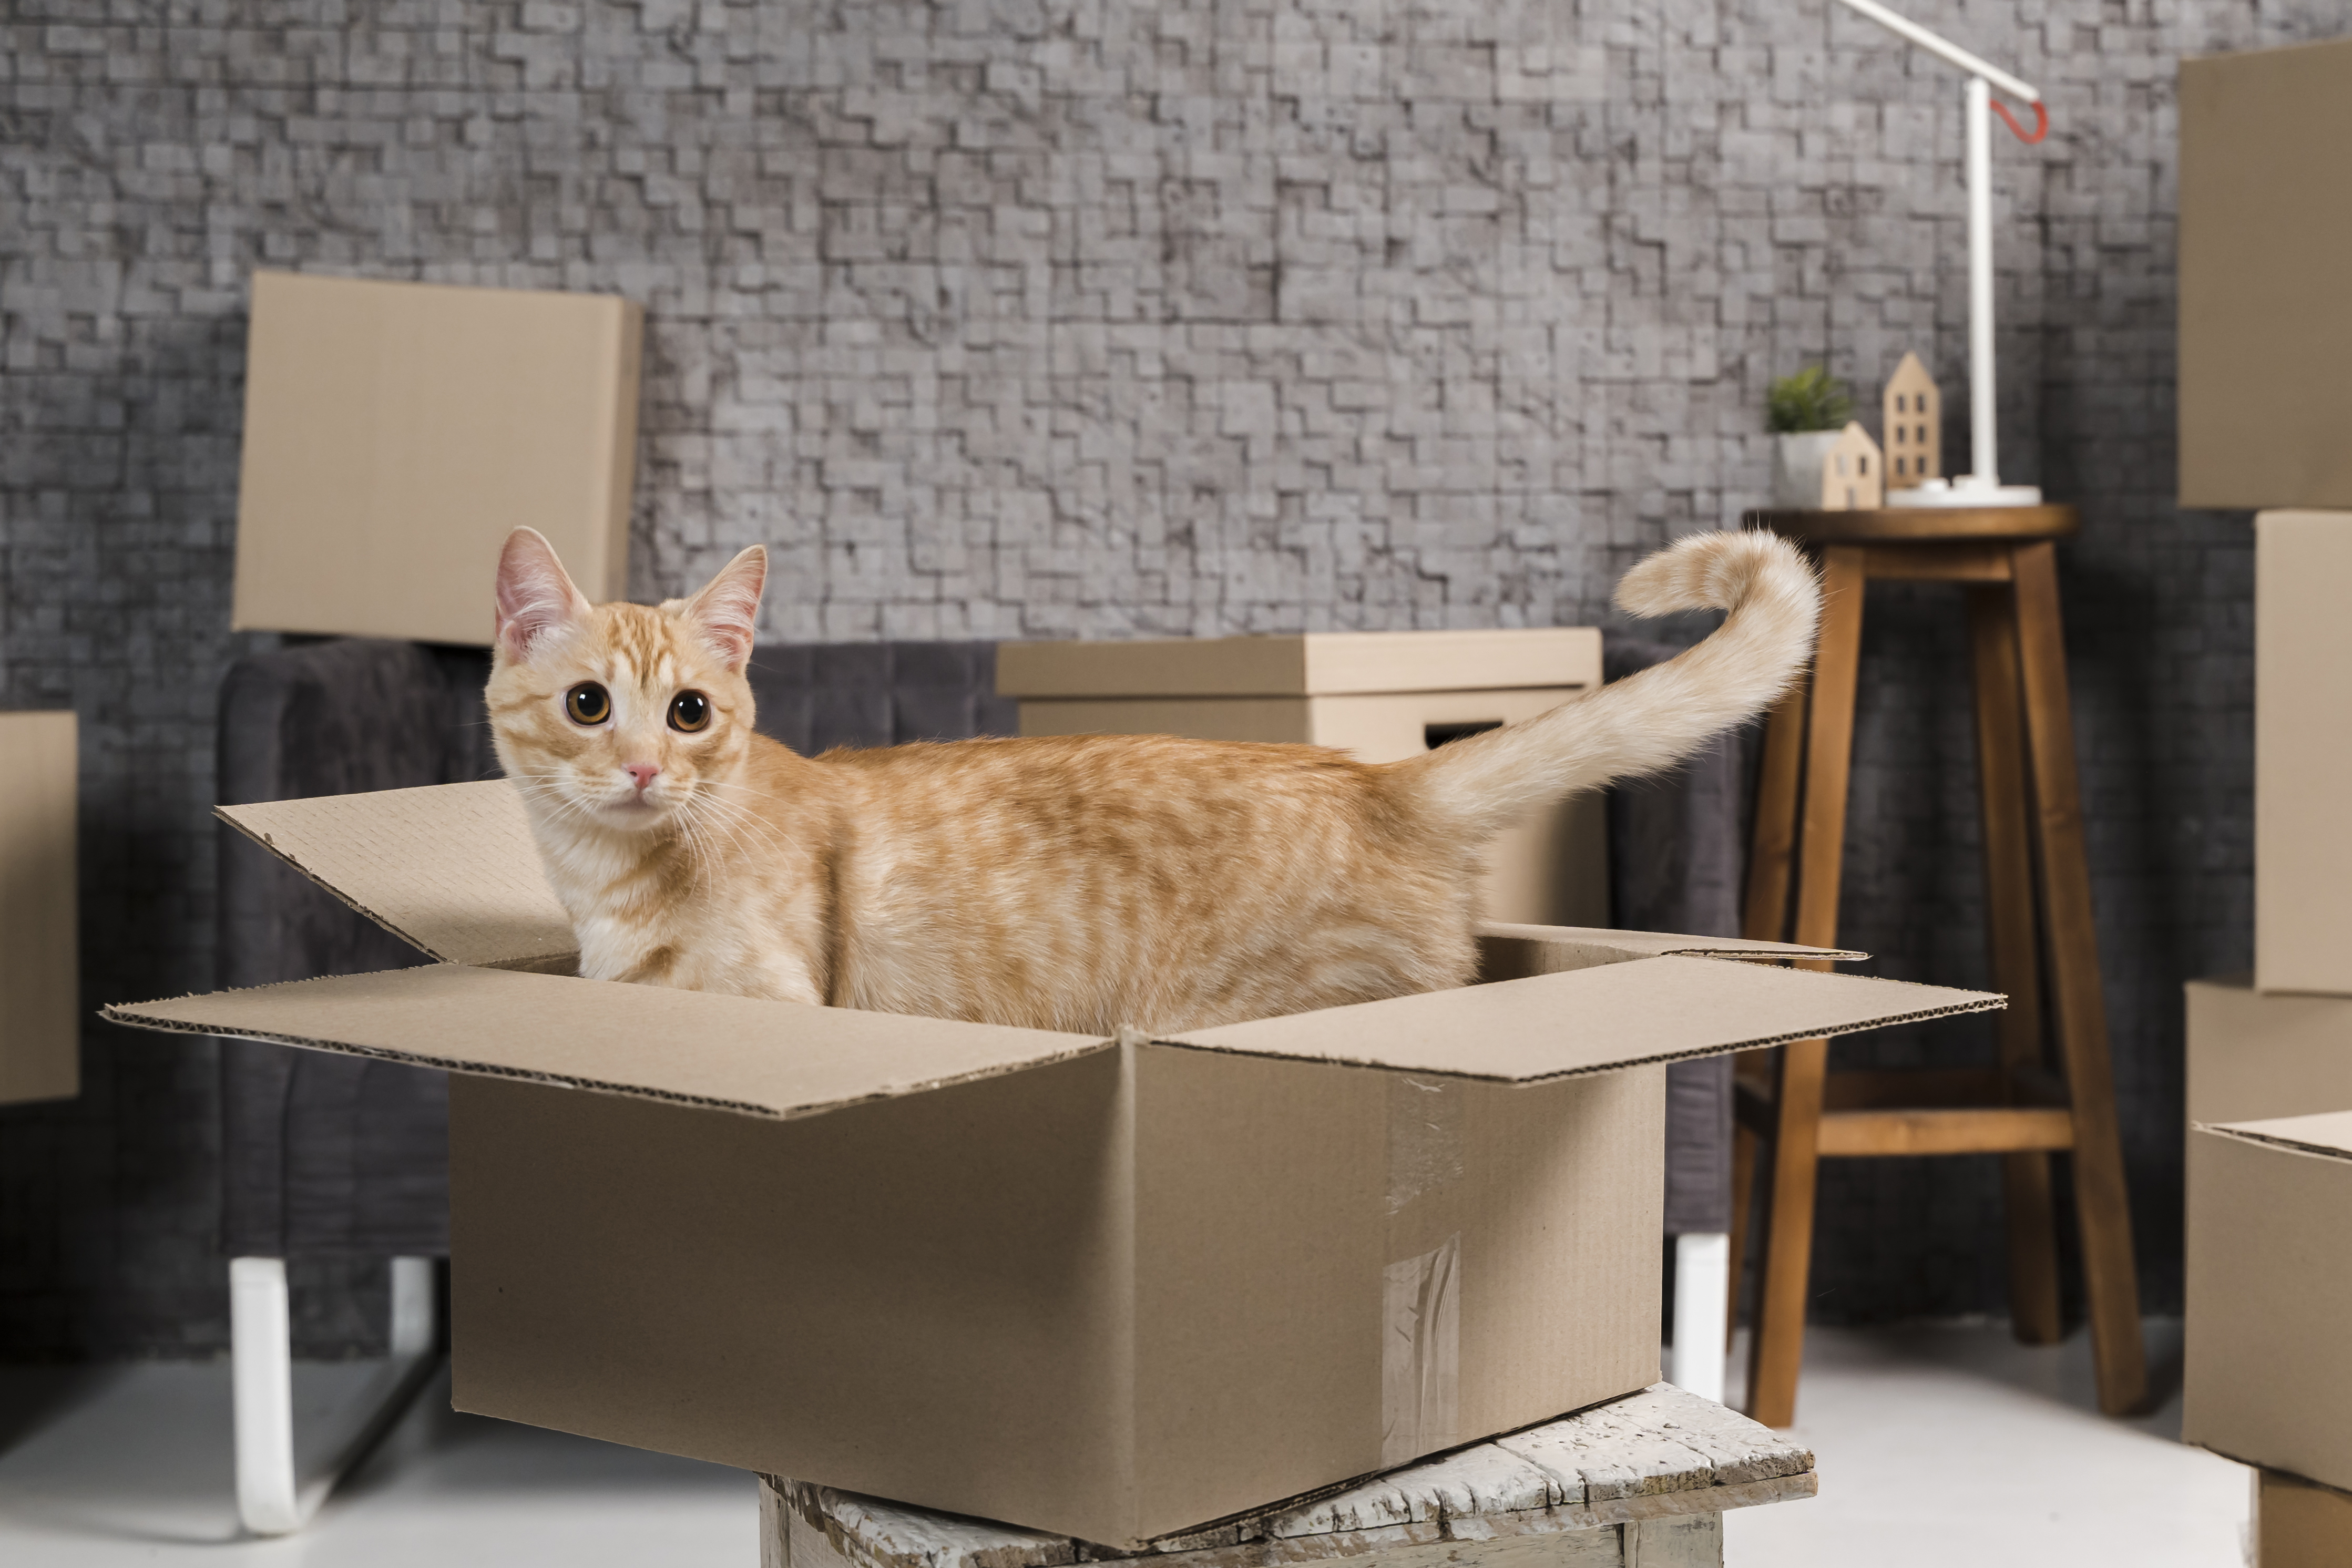 A tabby cat standing in a cardboard box inside a home